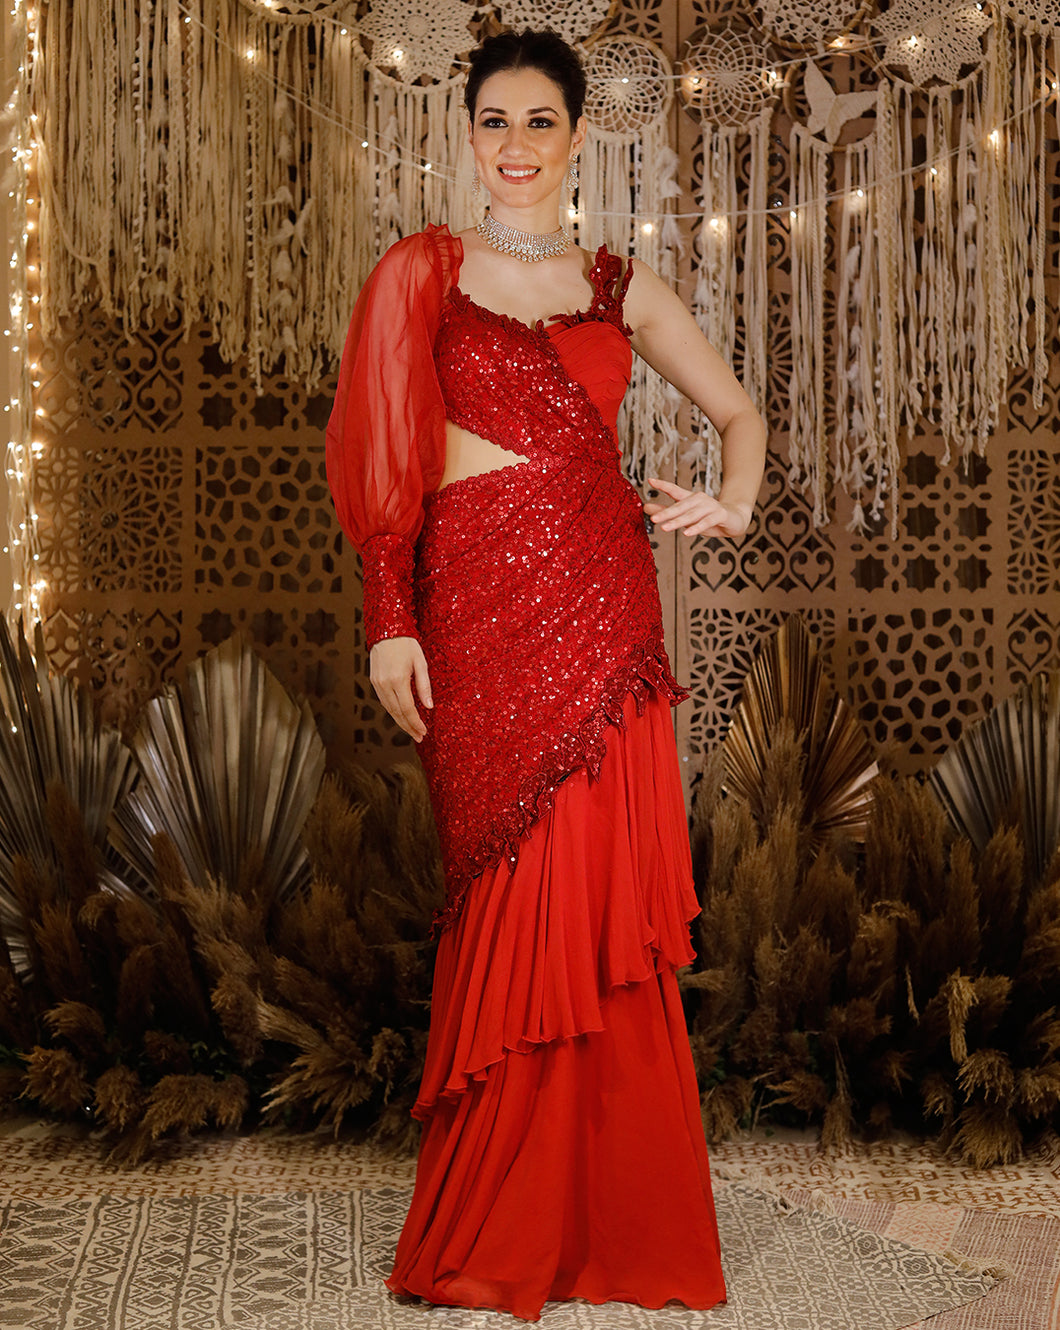 The red sequence gown